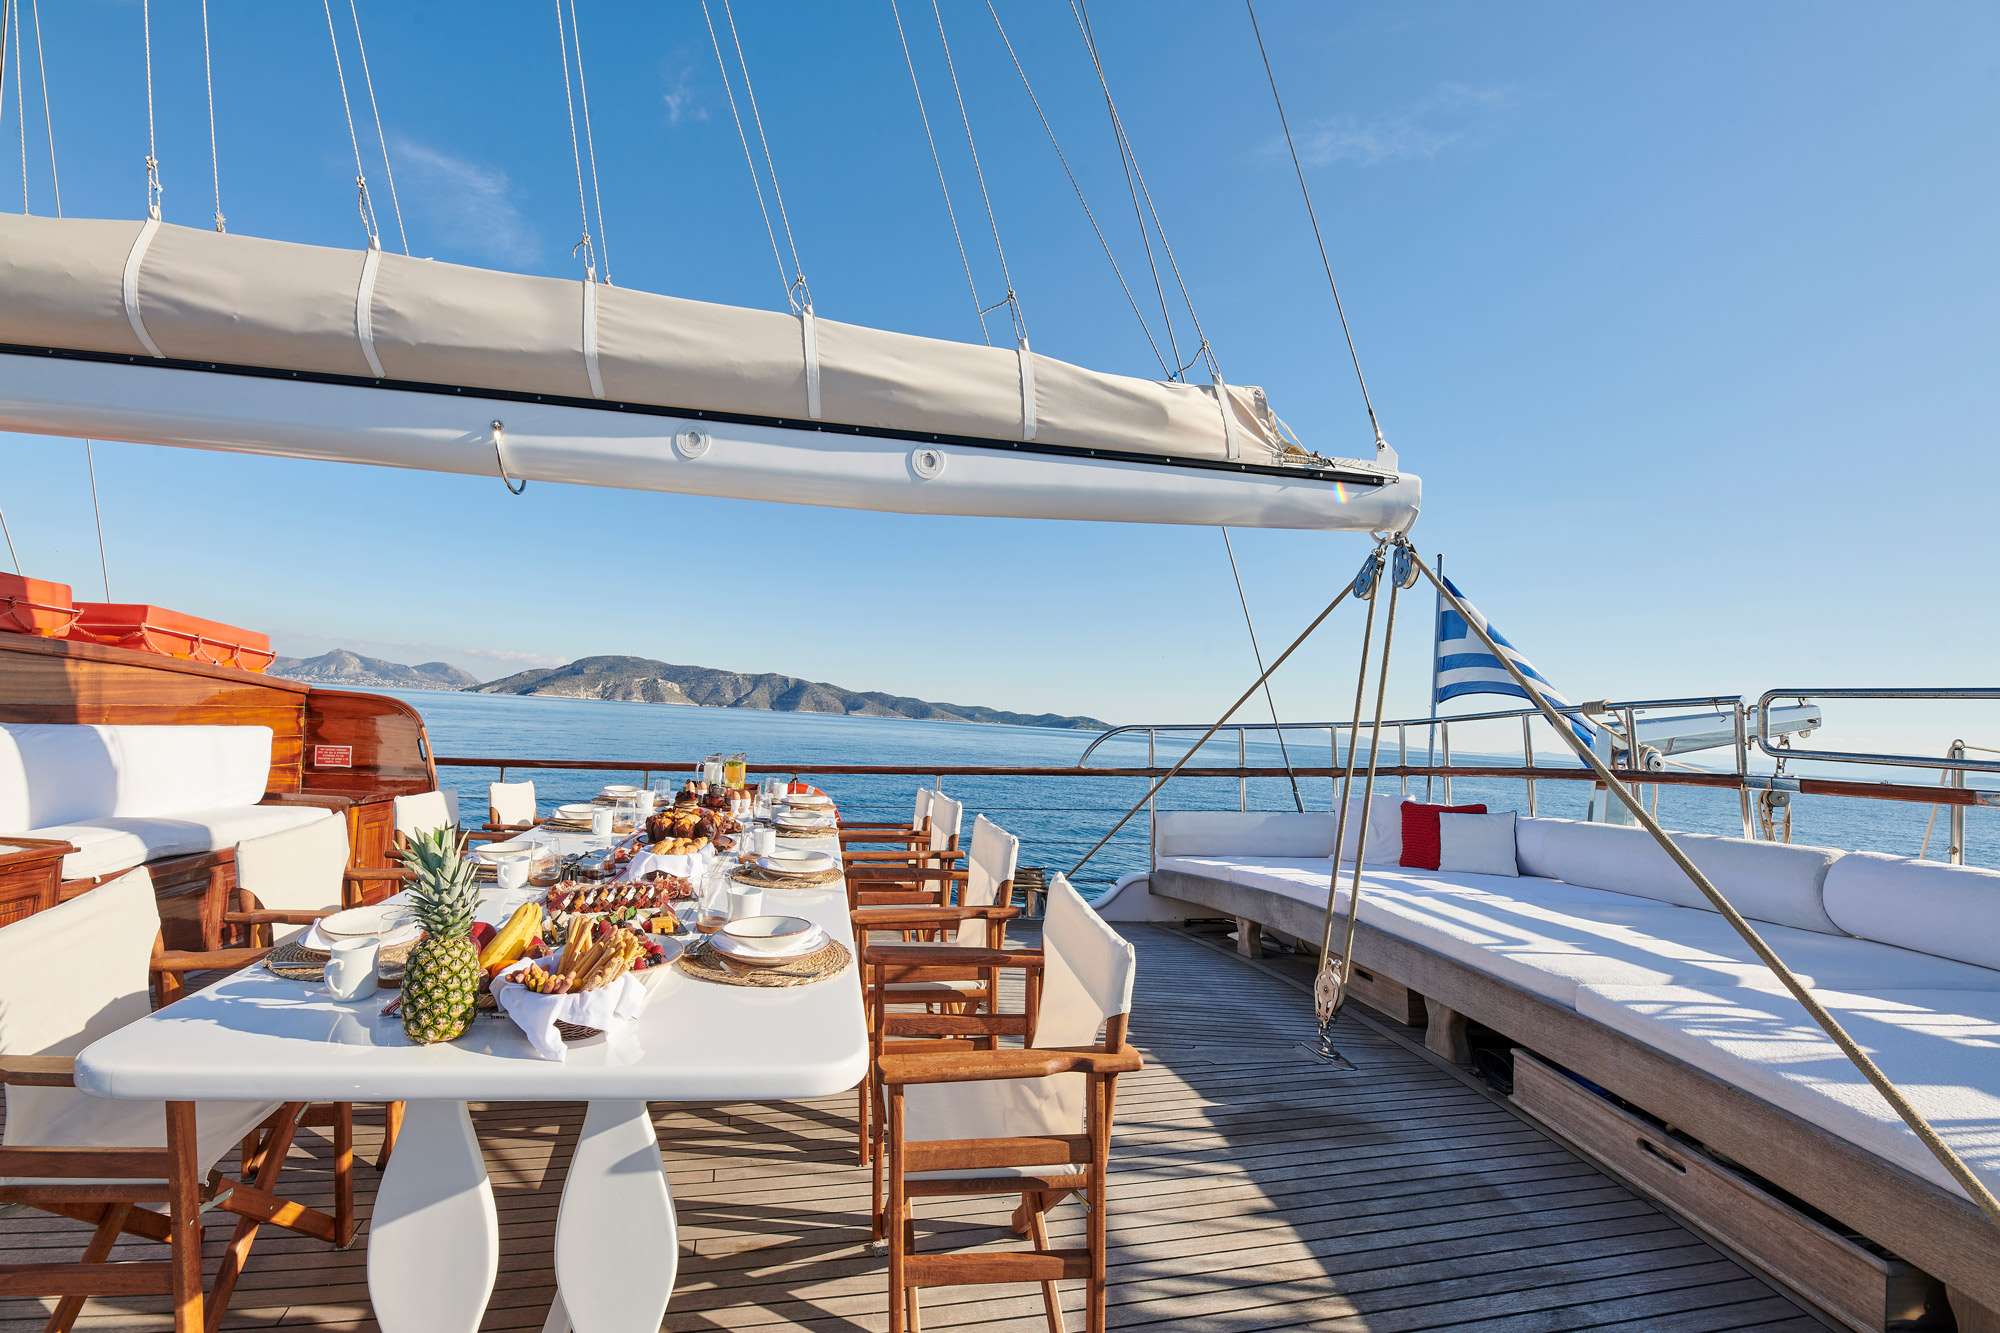 WHITE PEARL Yacht Charter - Aftdeck side view